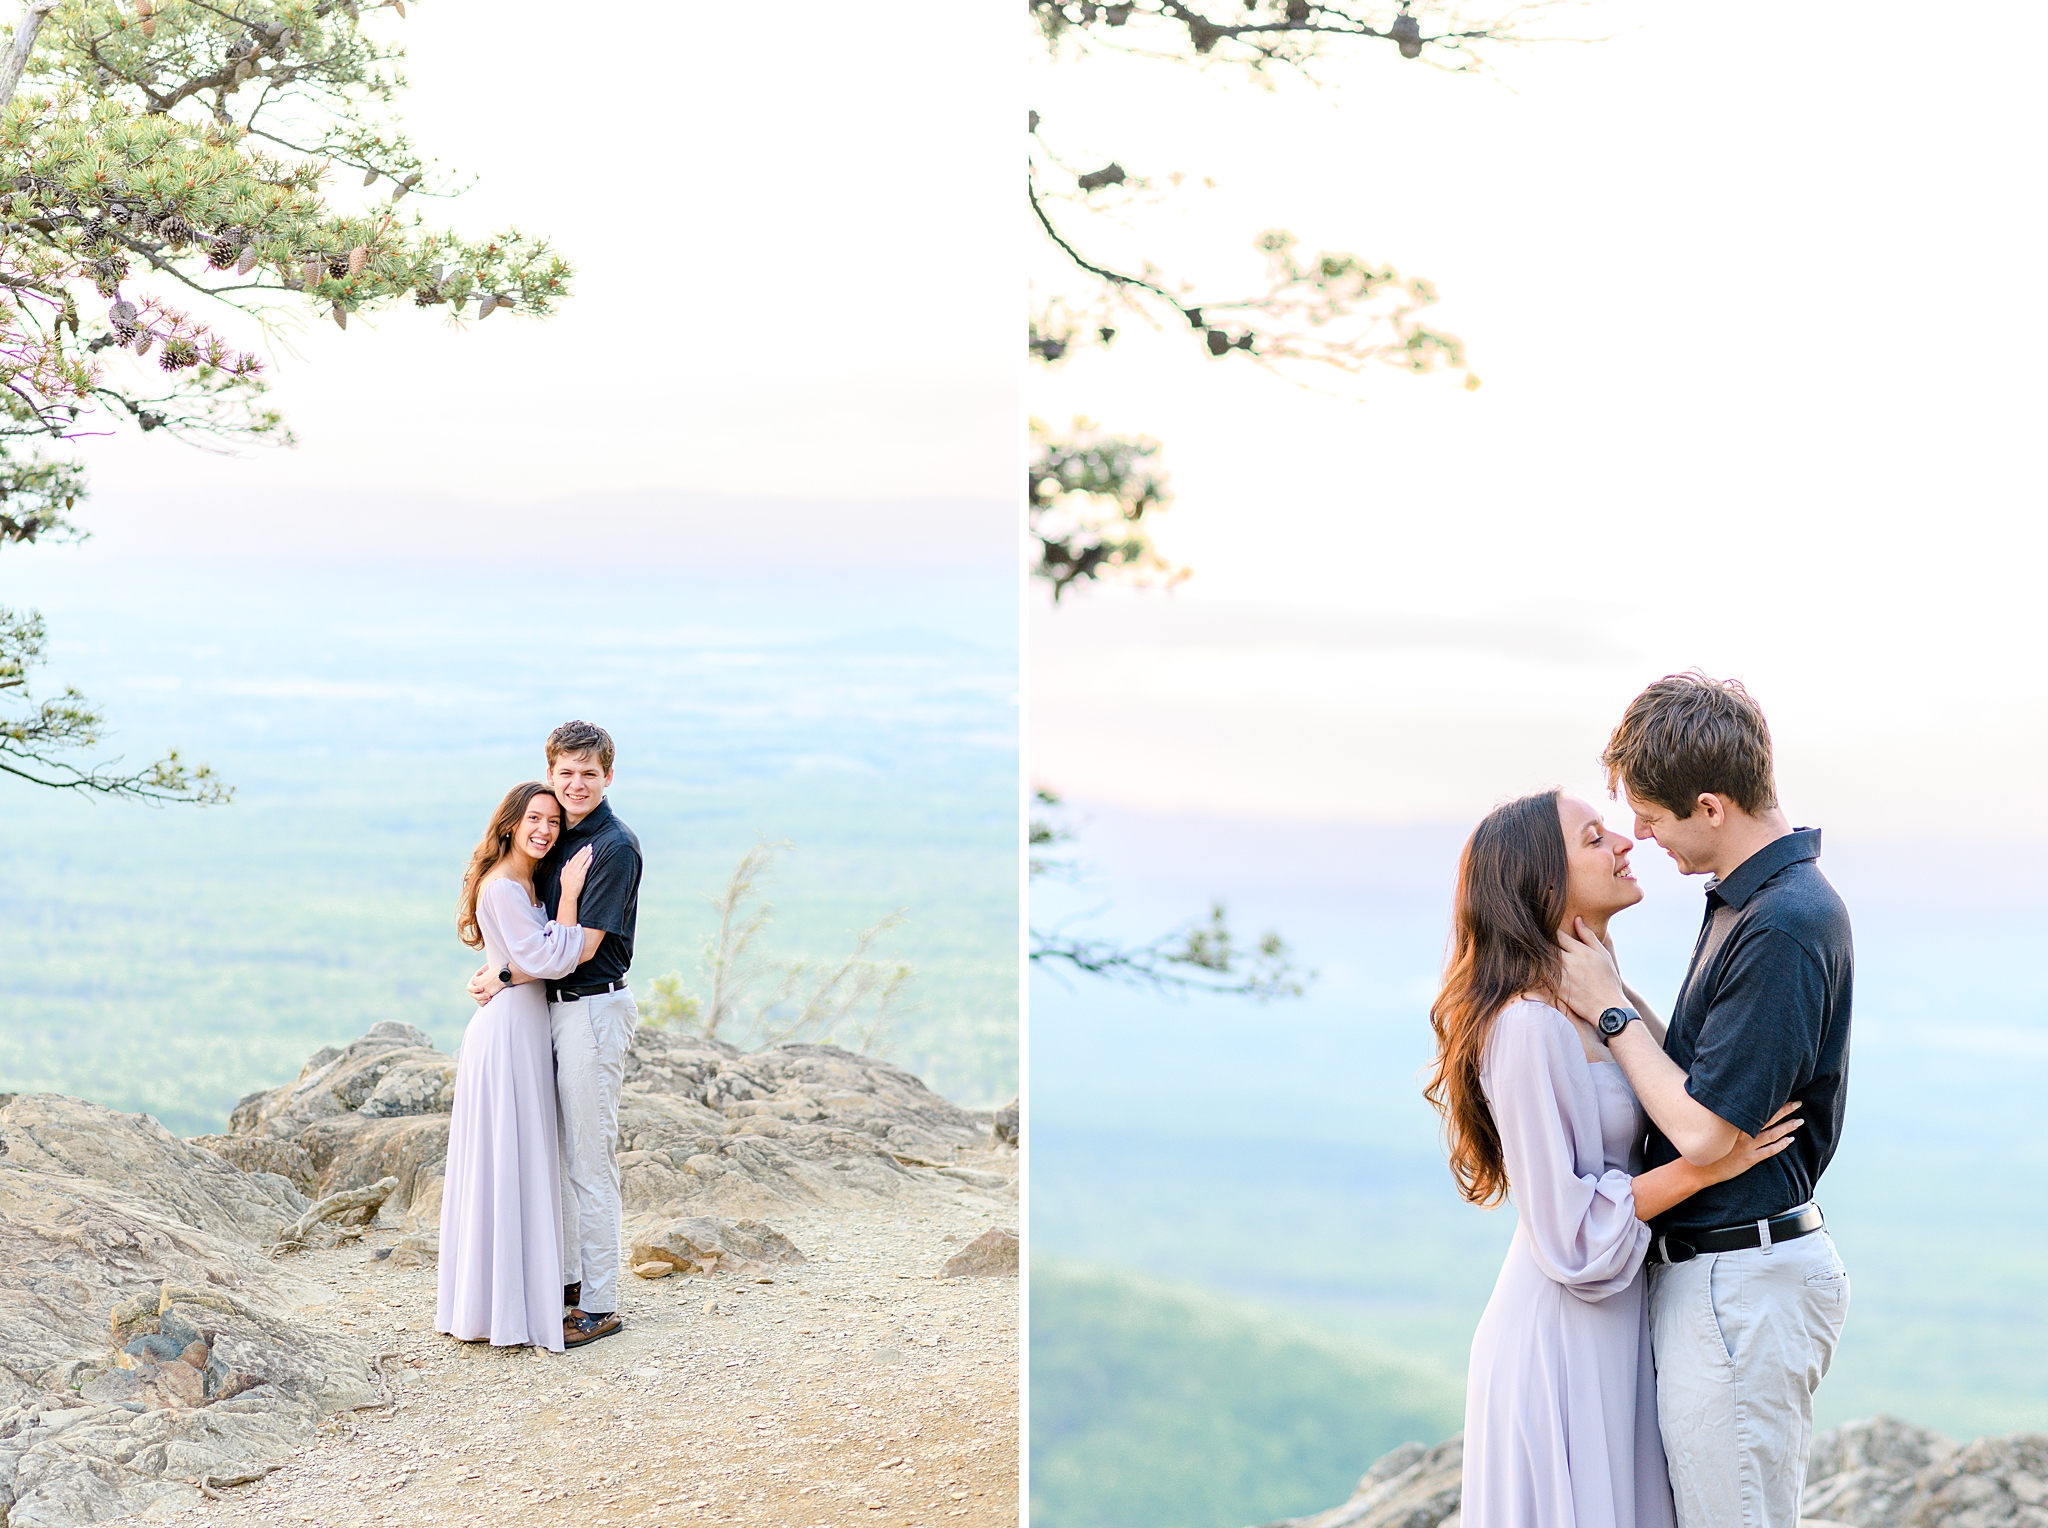 A joyful couple laughing together against the scenic Ravens Roost Overlook, a perfect setting for their engagement session.